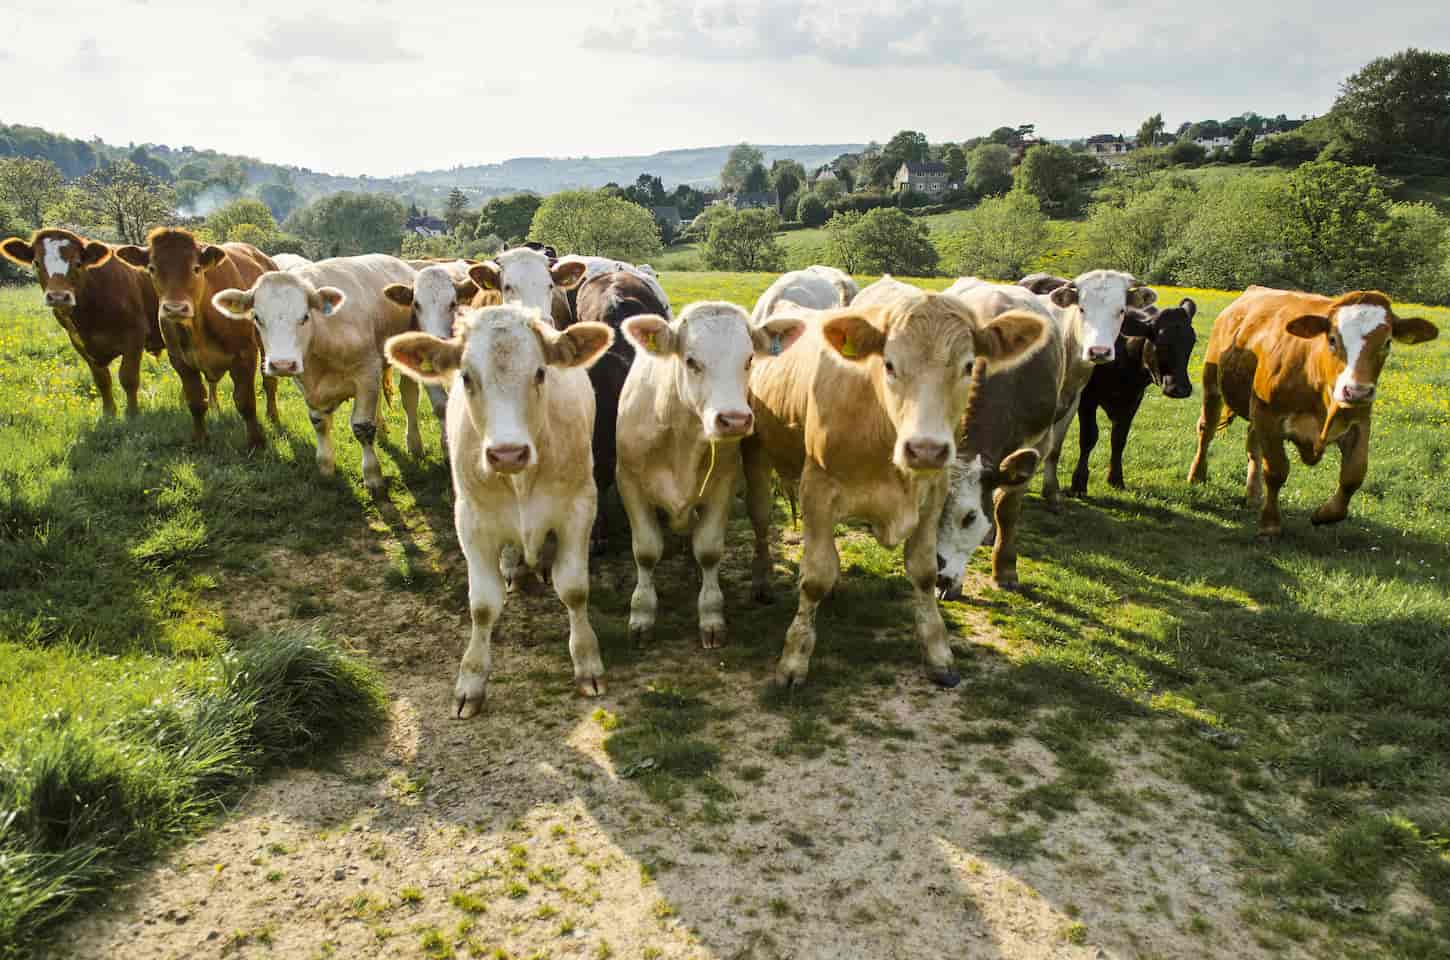 An image of a herd of cows in a rural green field.